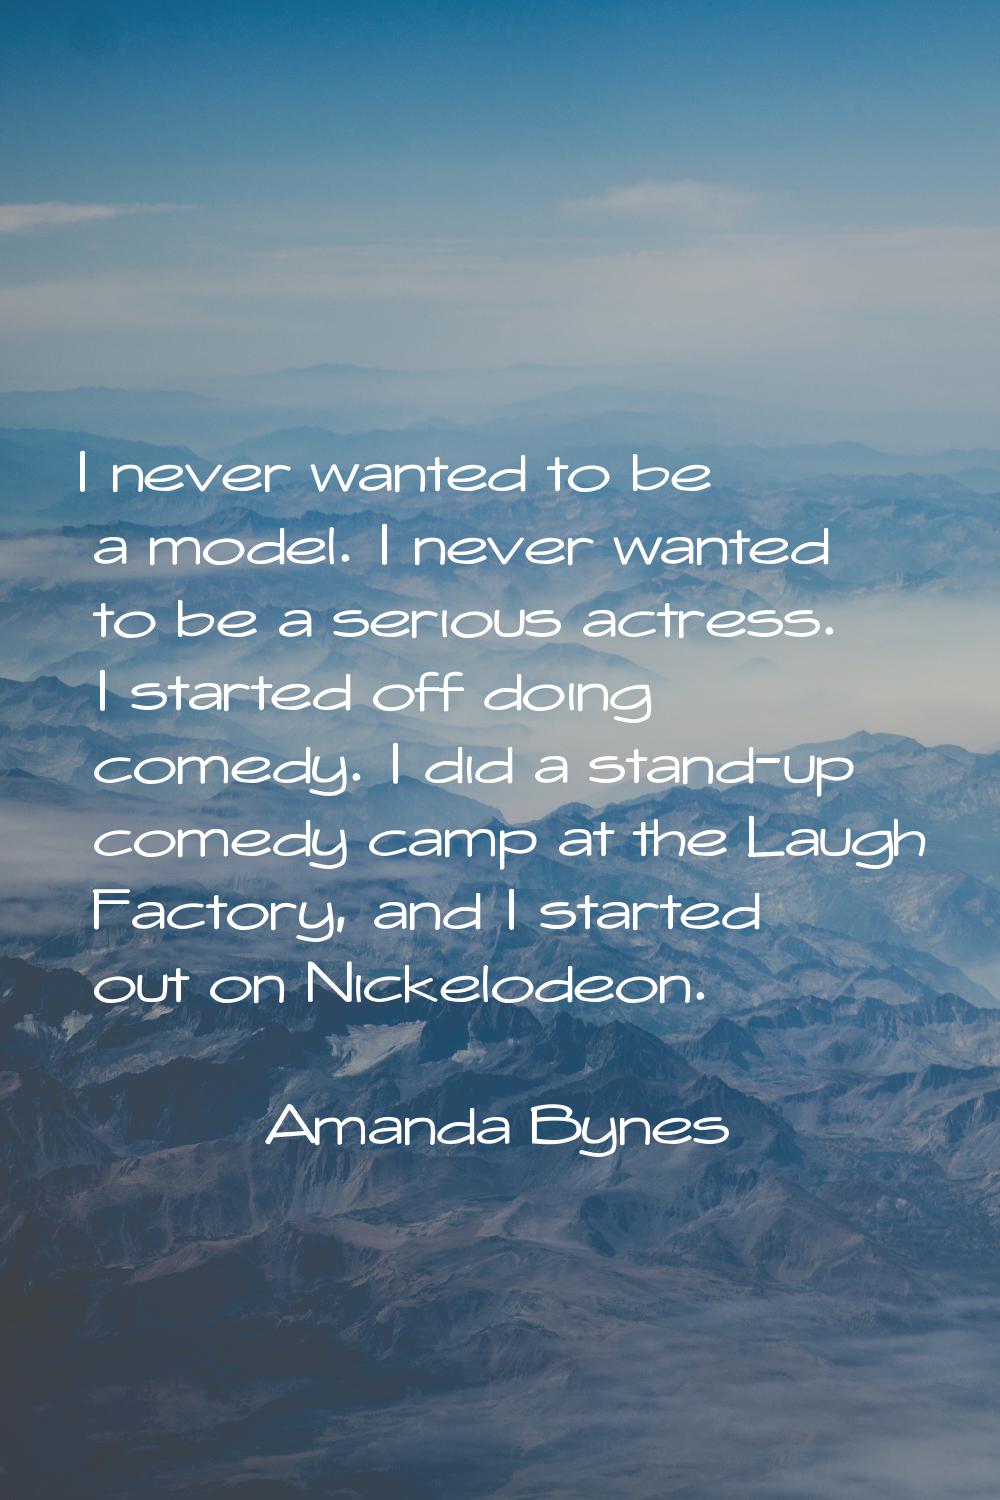 I never wanted to be a model. I never wanted to be a serious actress. I started off doing comedy. I